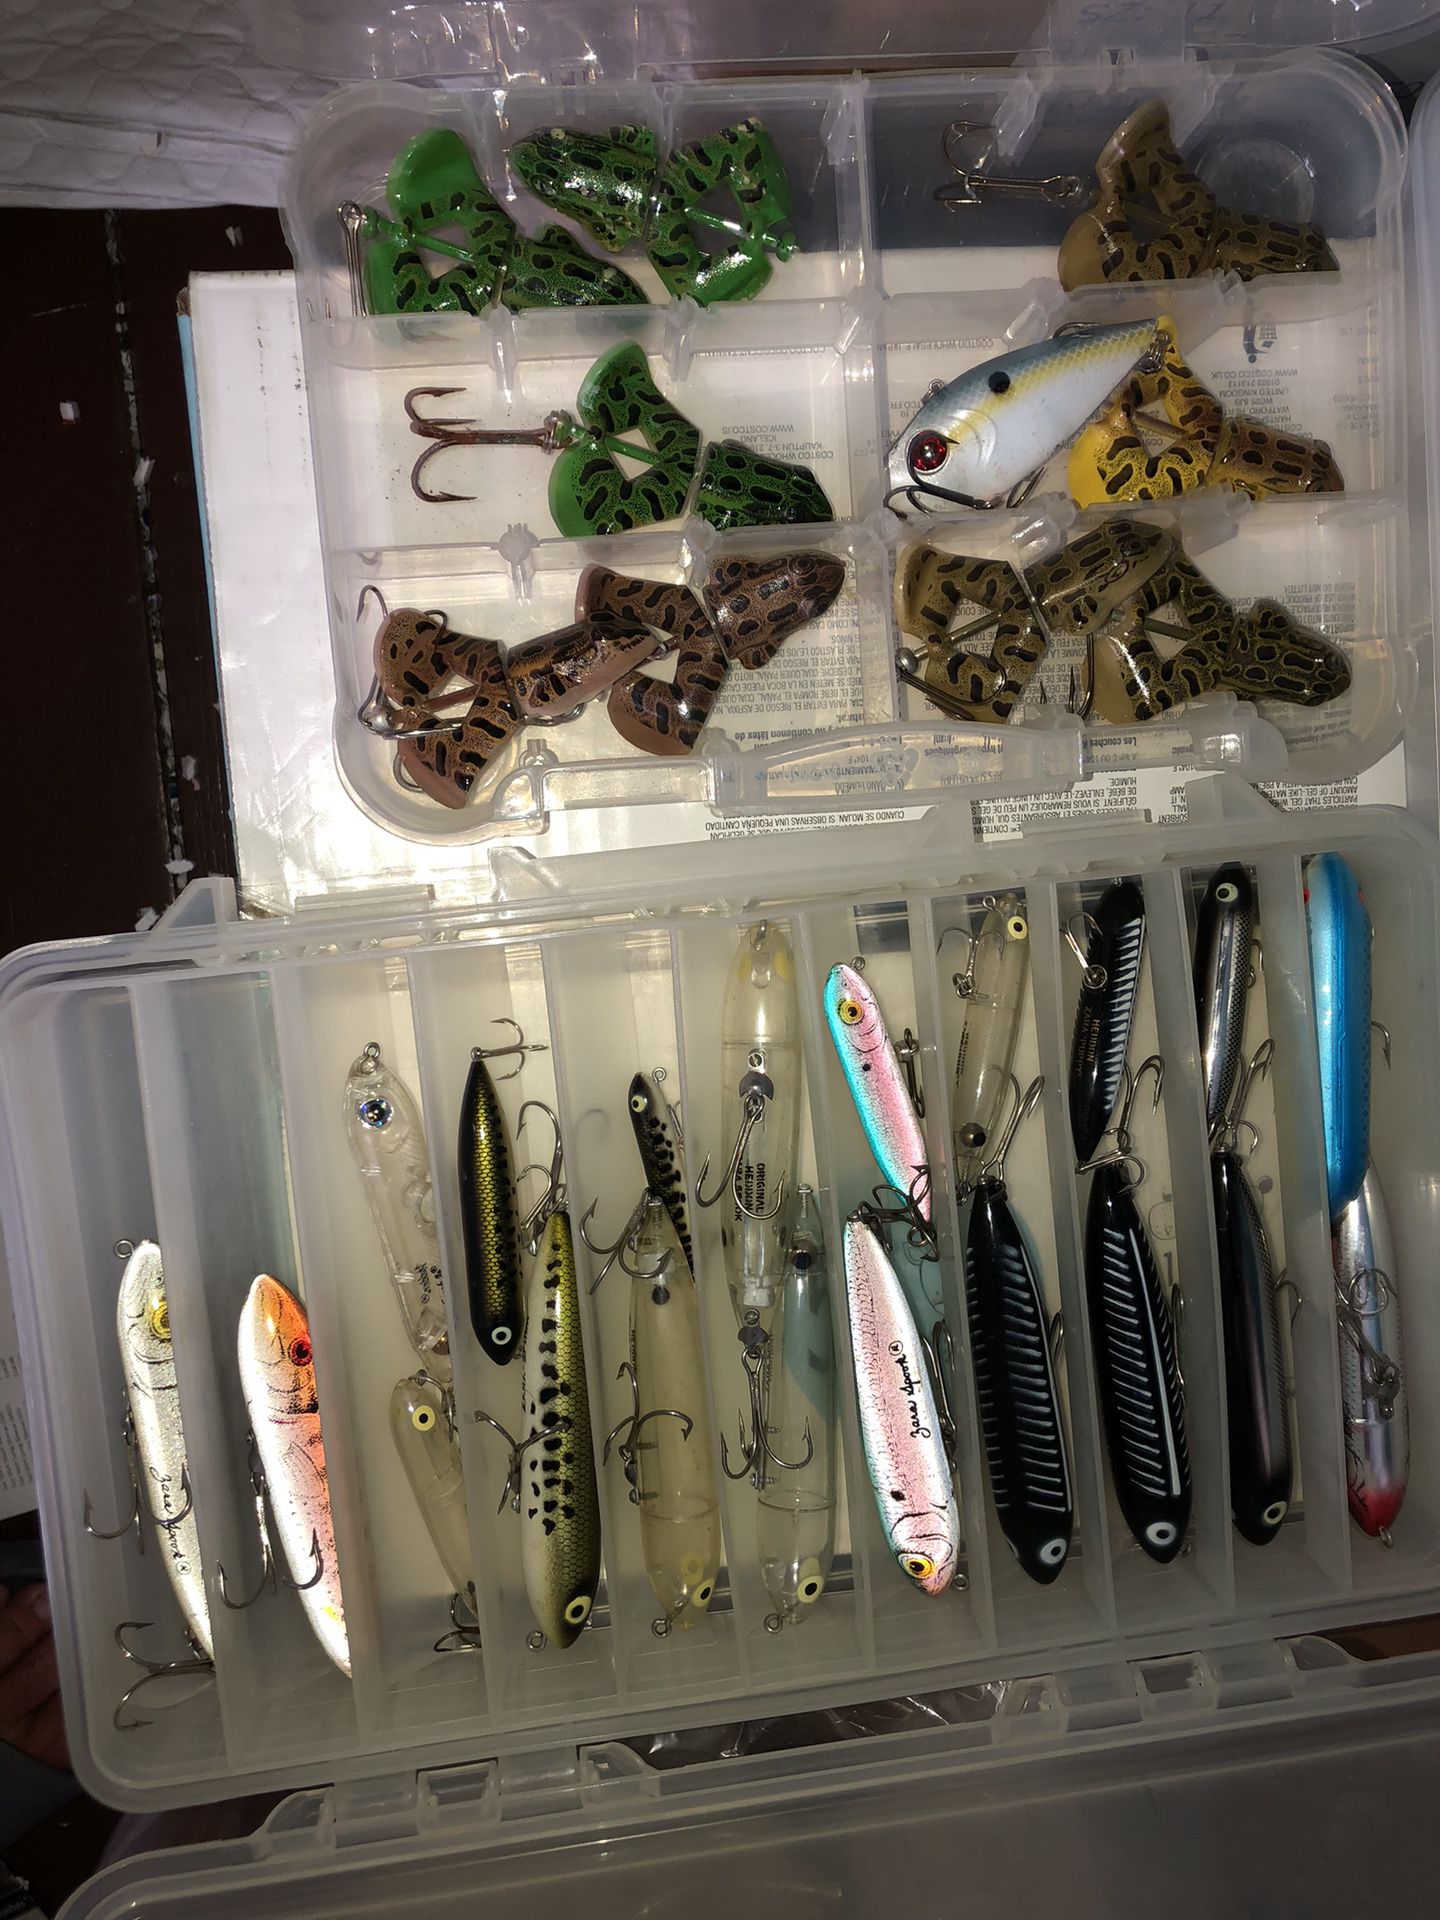 brand new bass fishing lures for Sale in Galveston, TX - OfferUp